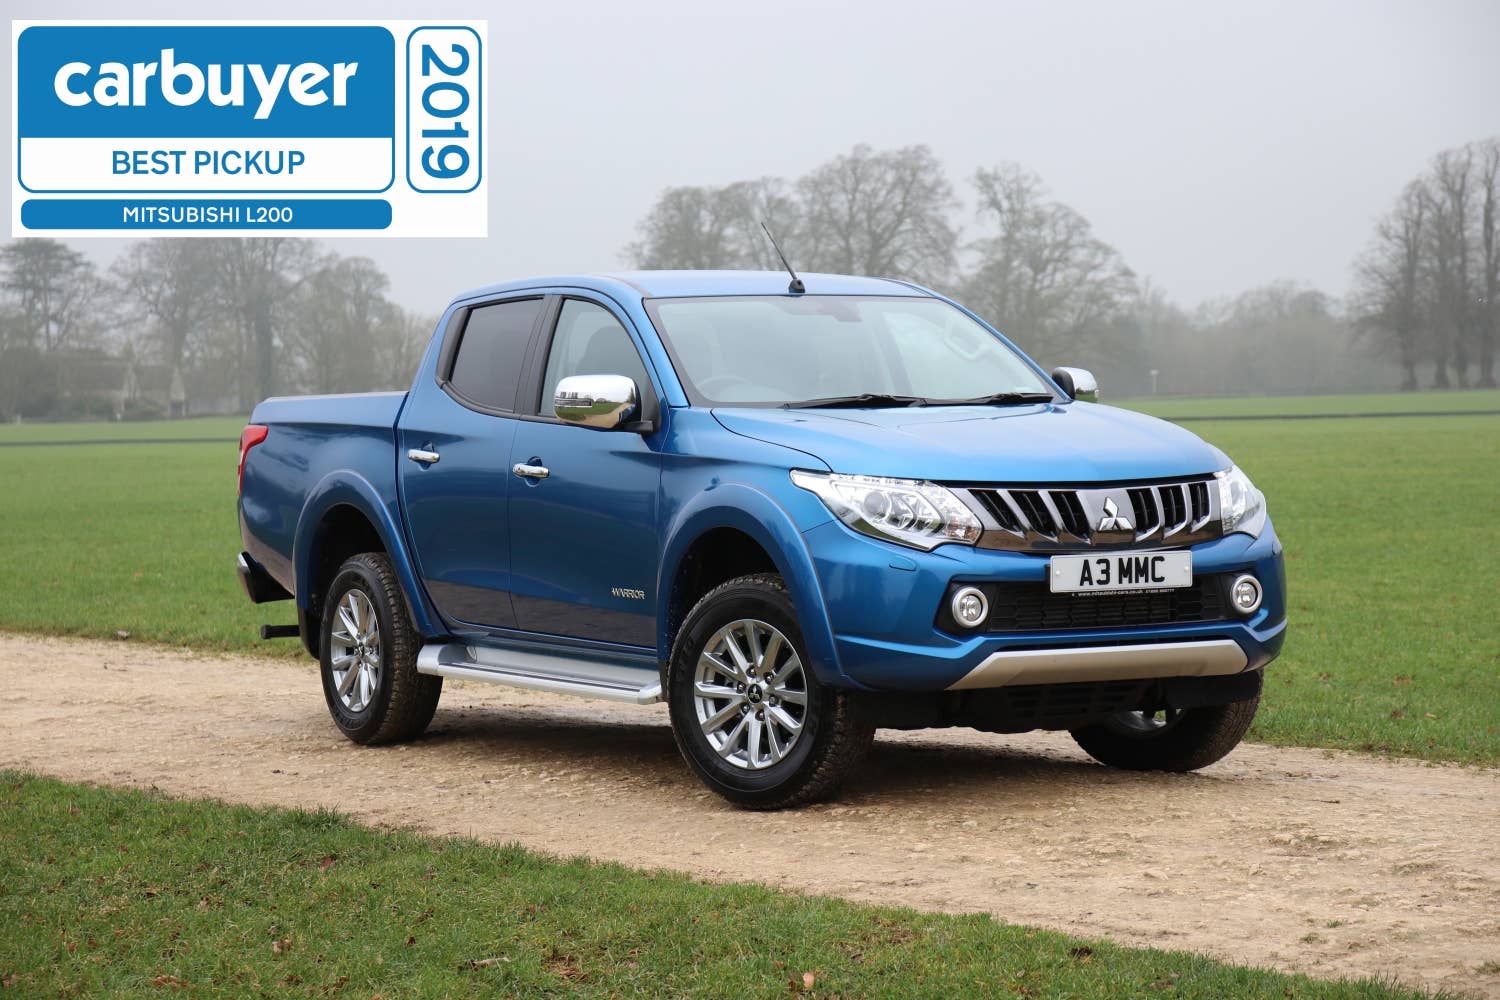 Mitsubishi L200 pick-up truck review: upping the refinement